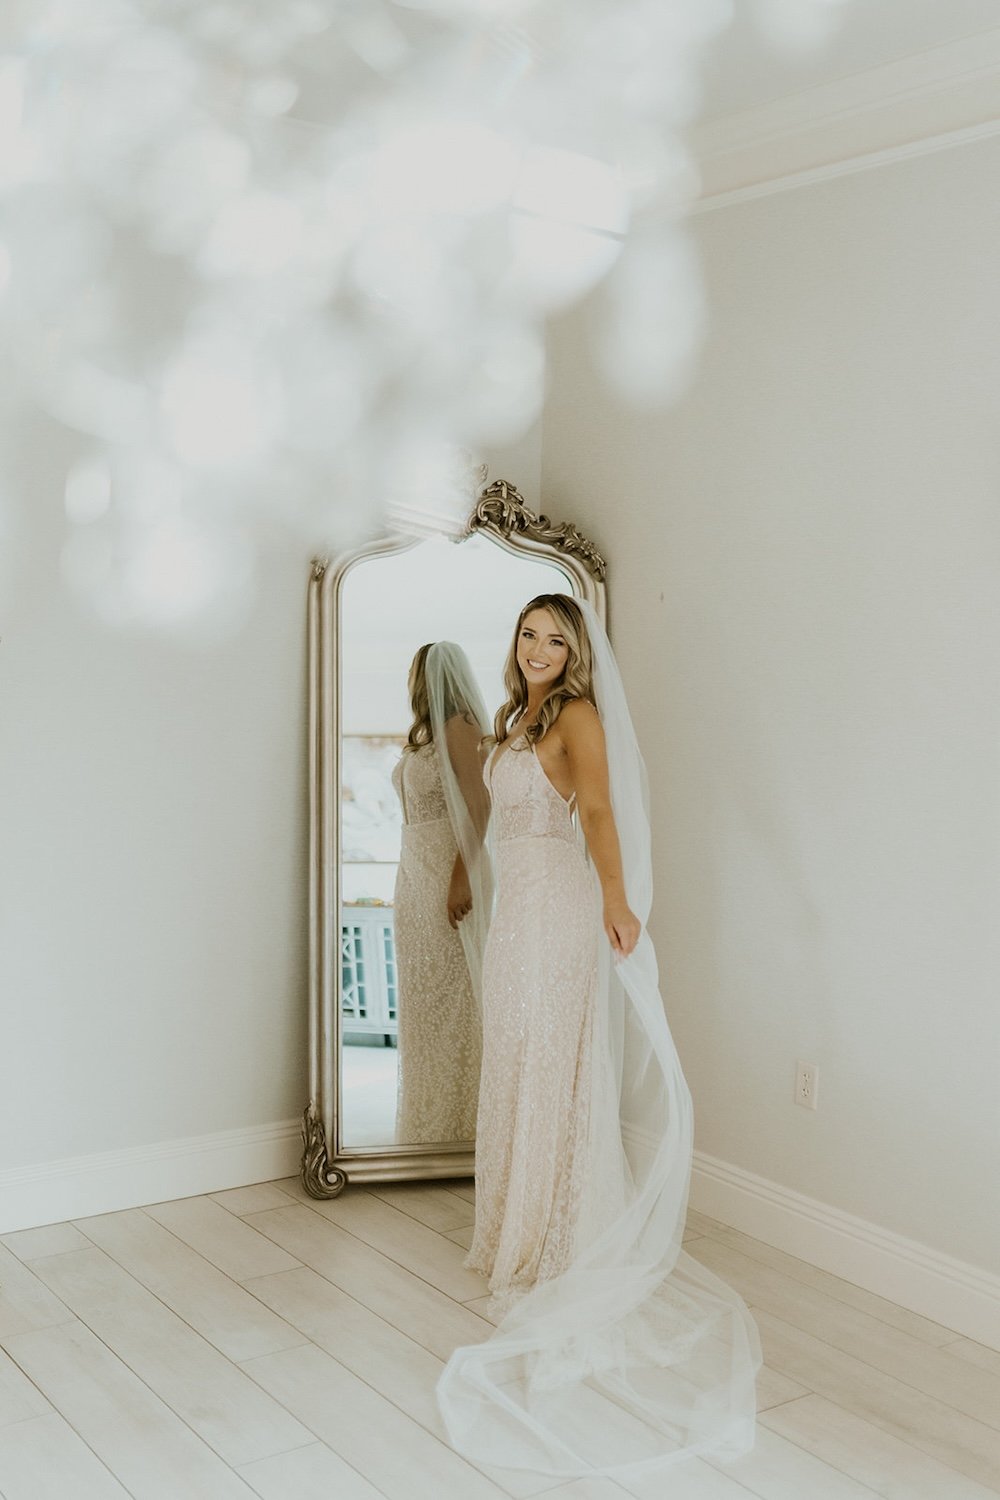 The bride stands infront of the mirror admiring herself.